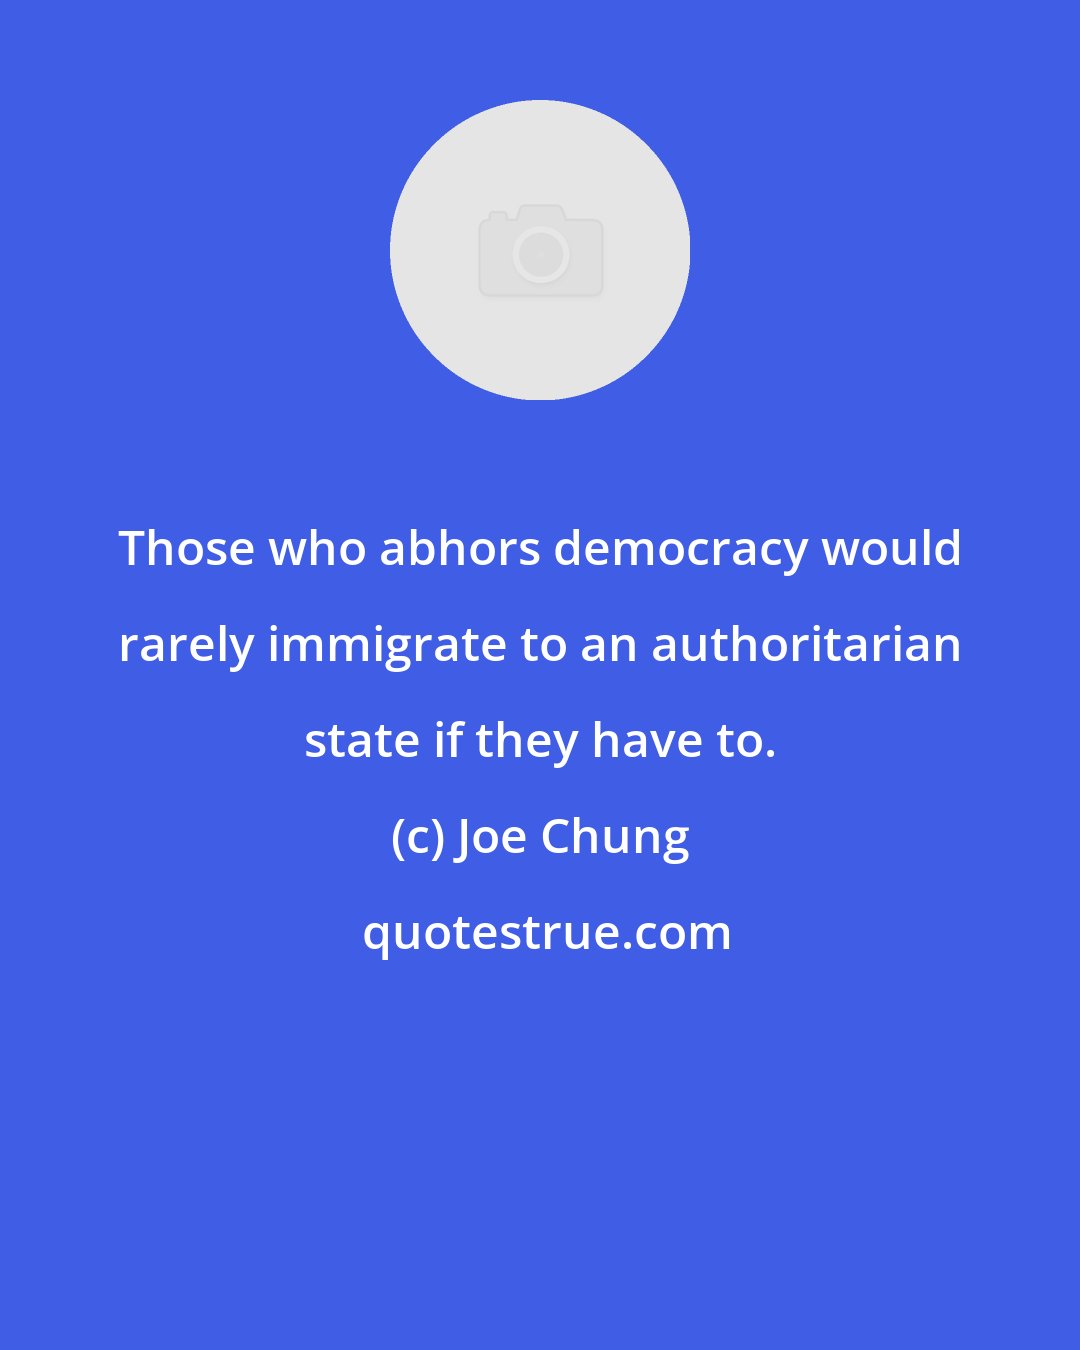 Joe Chung: Those who abhors democracy would rarely immigrate to an authoritarian state if they have to.